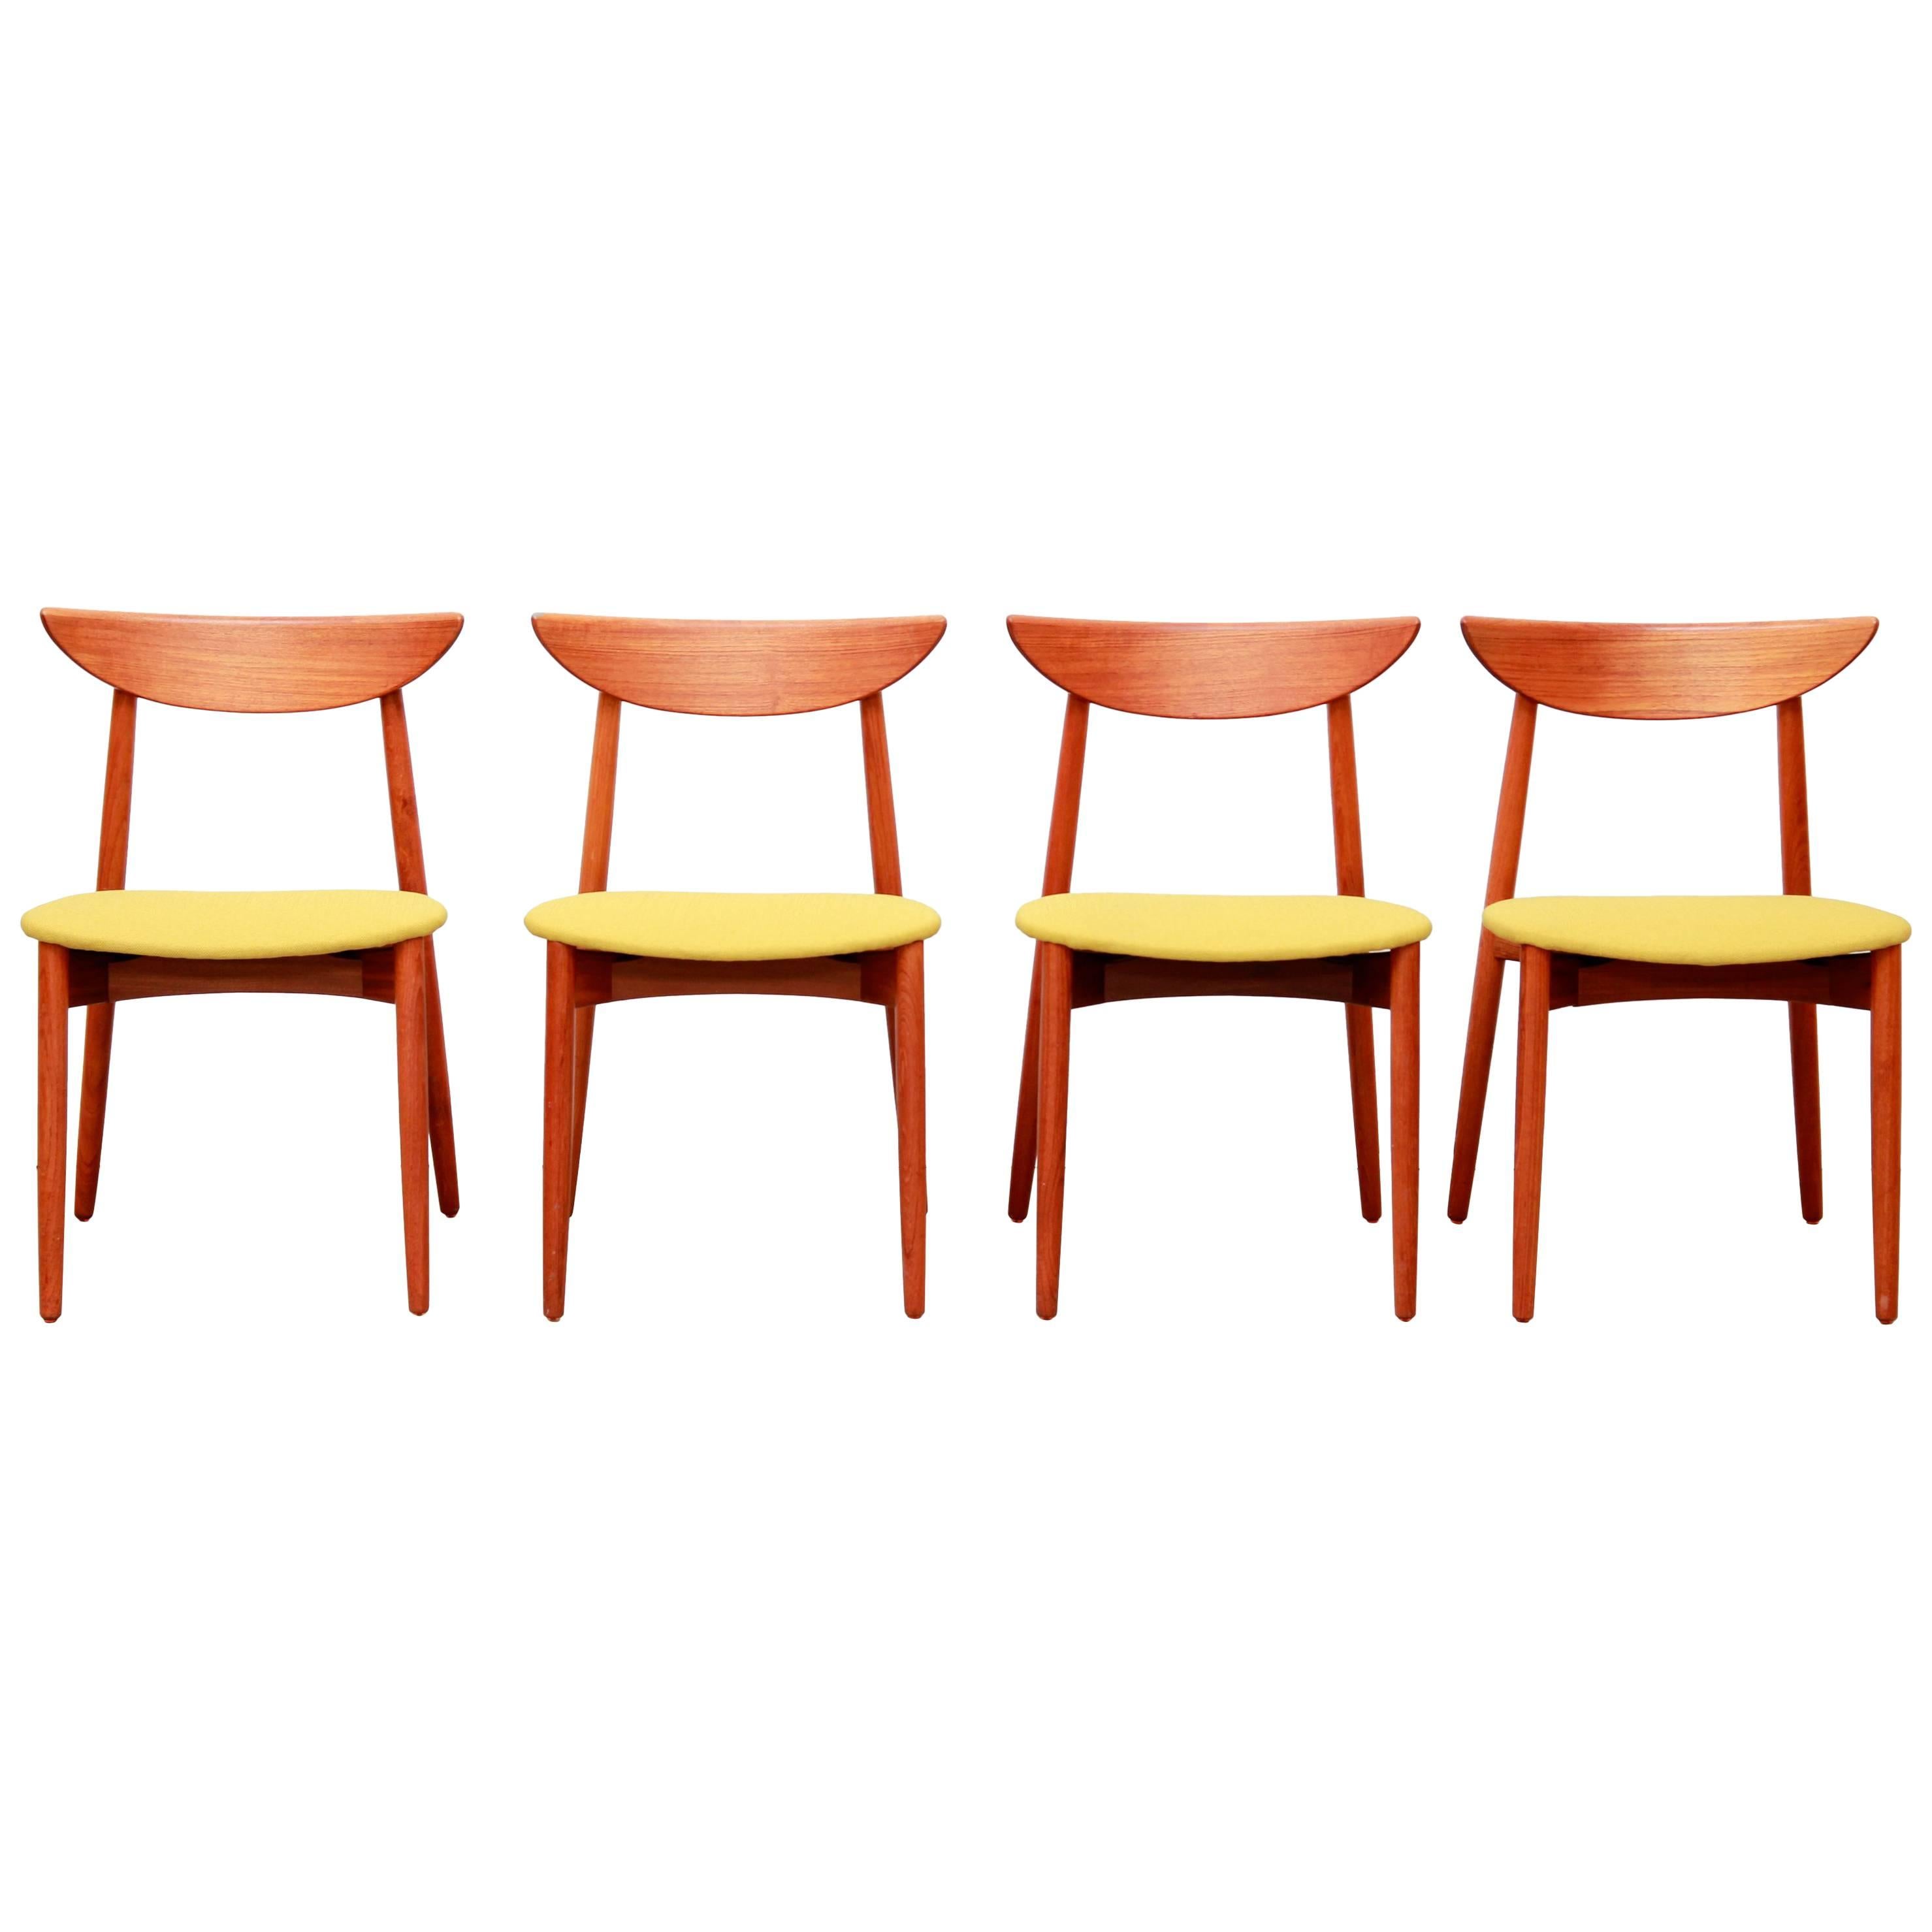 Set of Four Harry Ostergaard Danish Design Dining Room Chairs in Teak Model 58